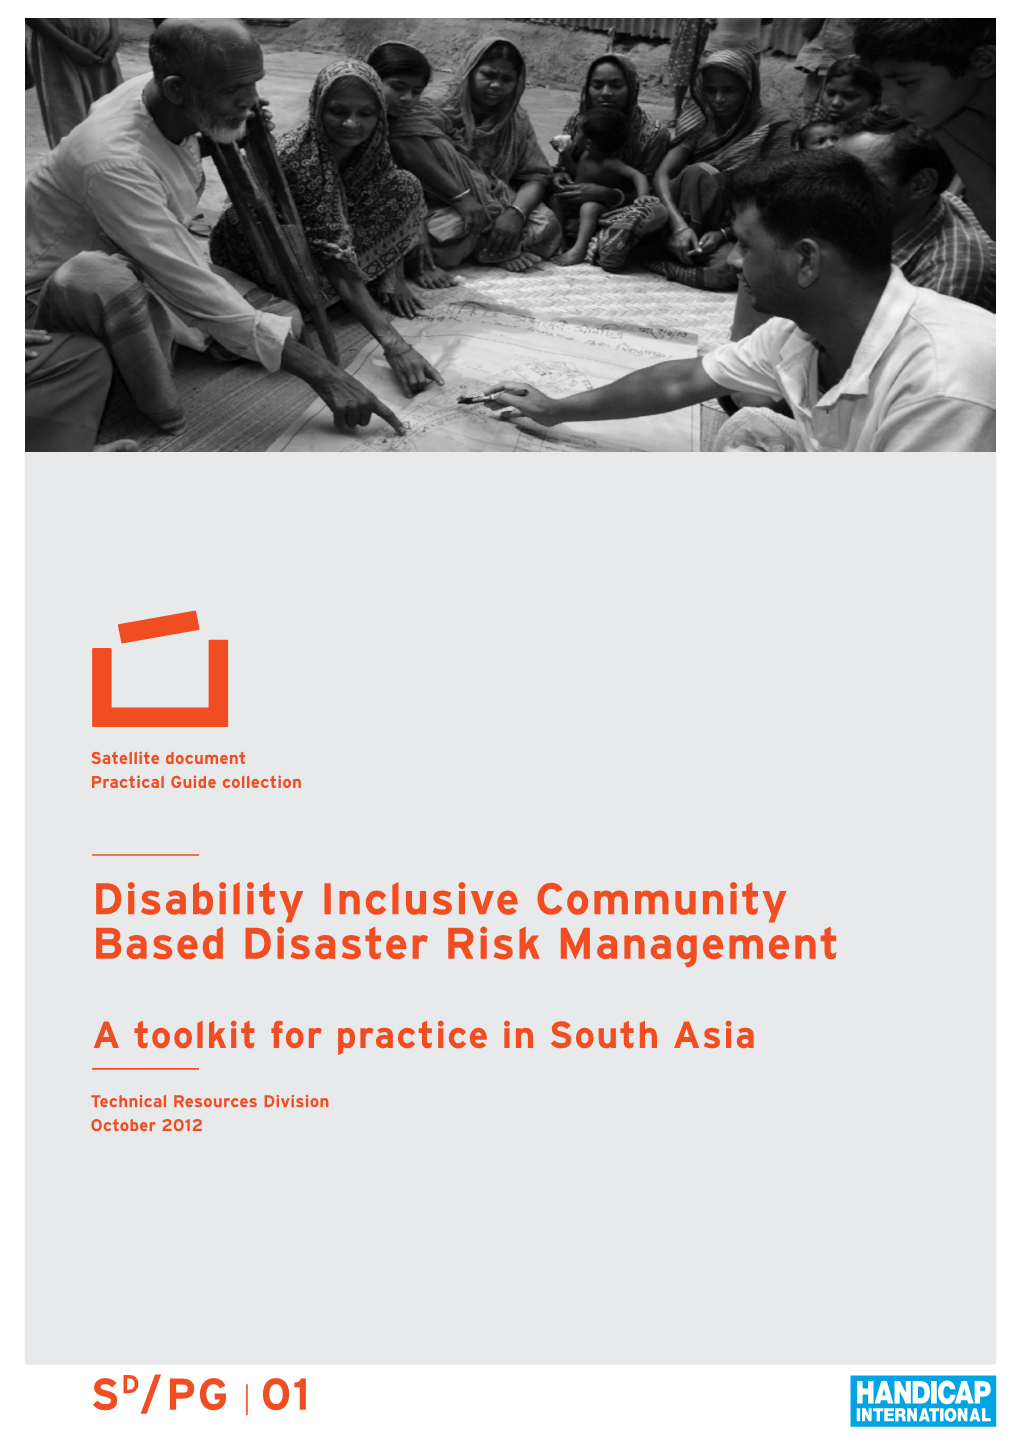 SD/ PG Disability Inclusive Community Based Disaster Risk Management 01